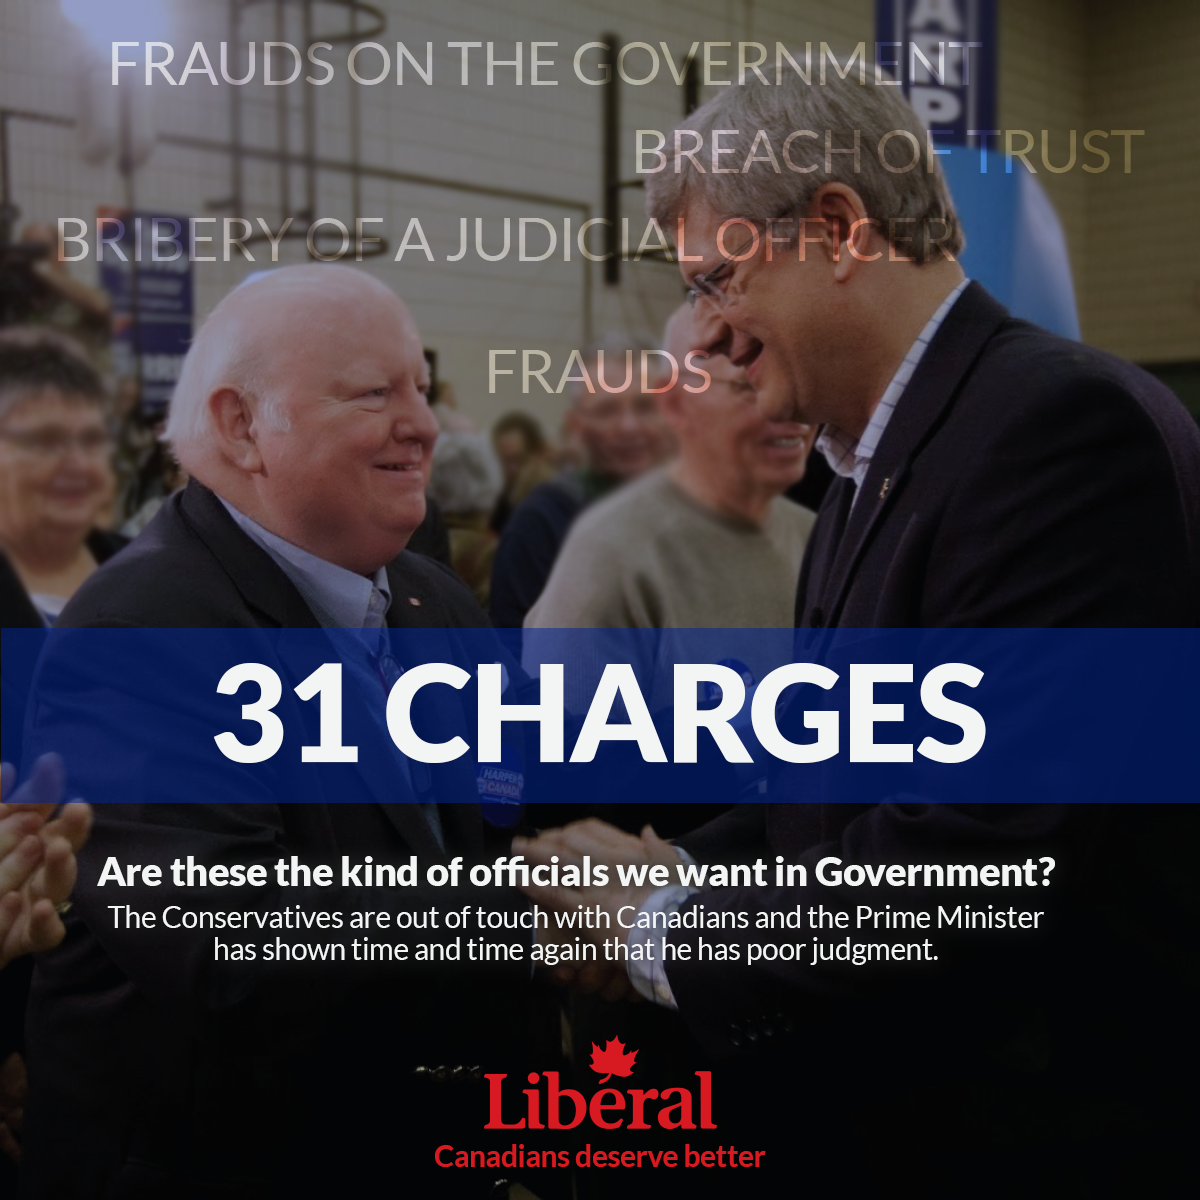 31 charges - are these the kind of officials we want in Government? The Conservatives are out of touch with Canadians and the Prime Minister has shown time and time again that he has poor judgement.